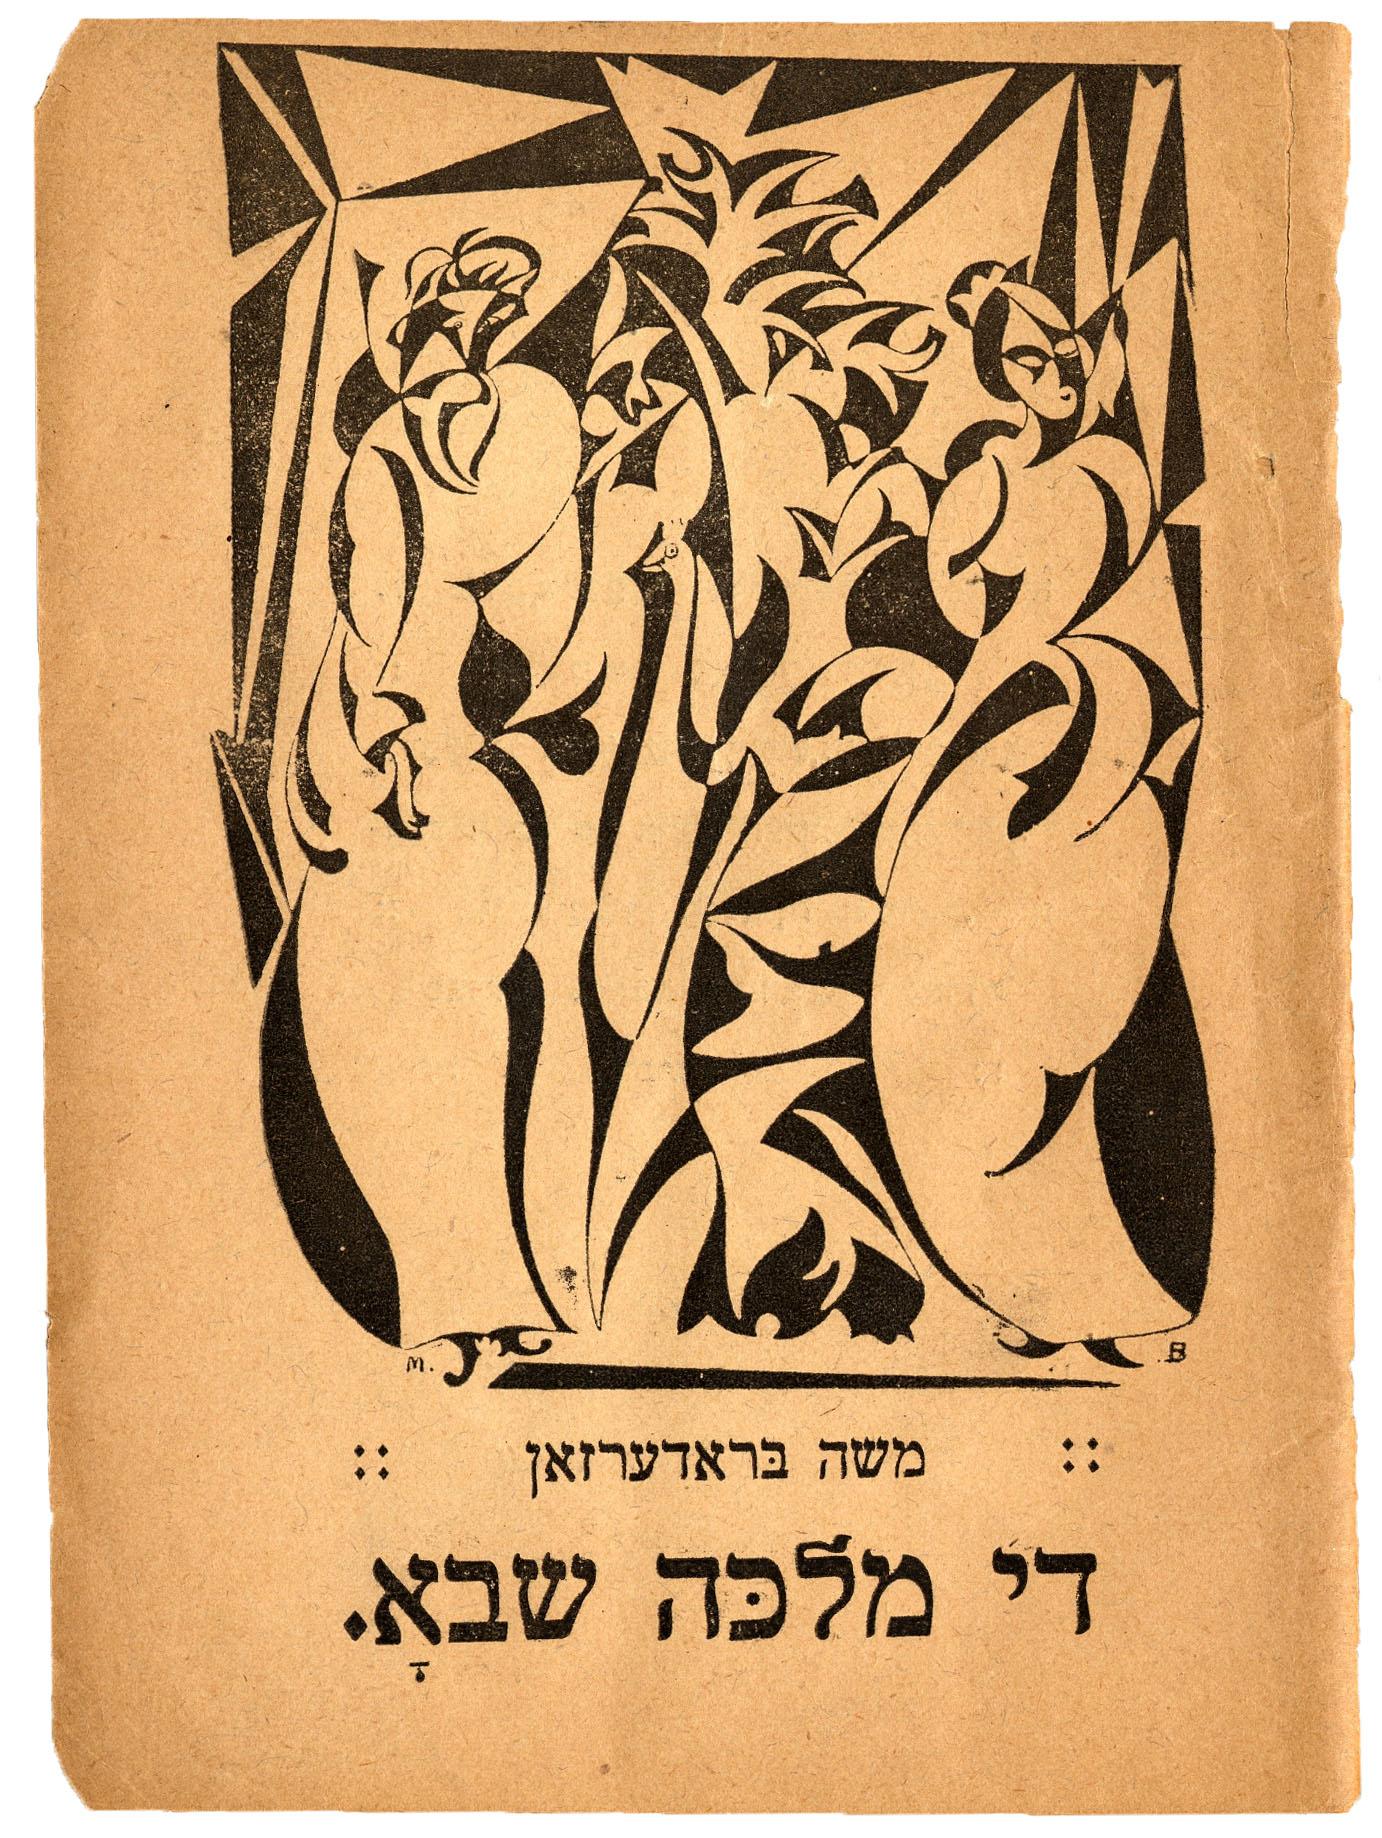 Print of two geometric figures with Yiddish heading underneath.